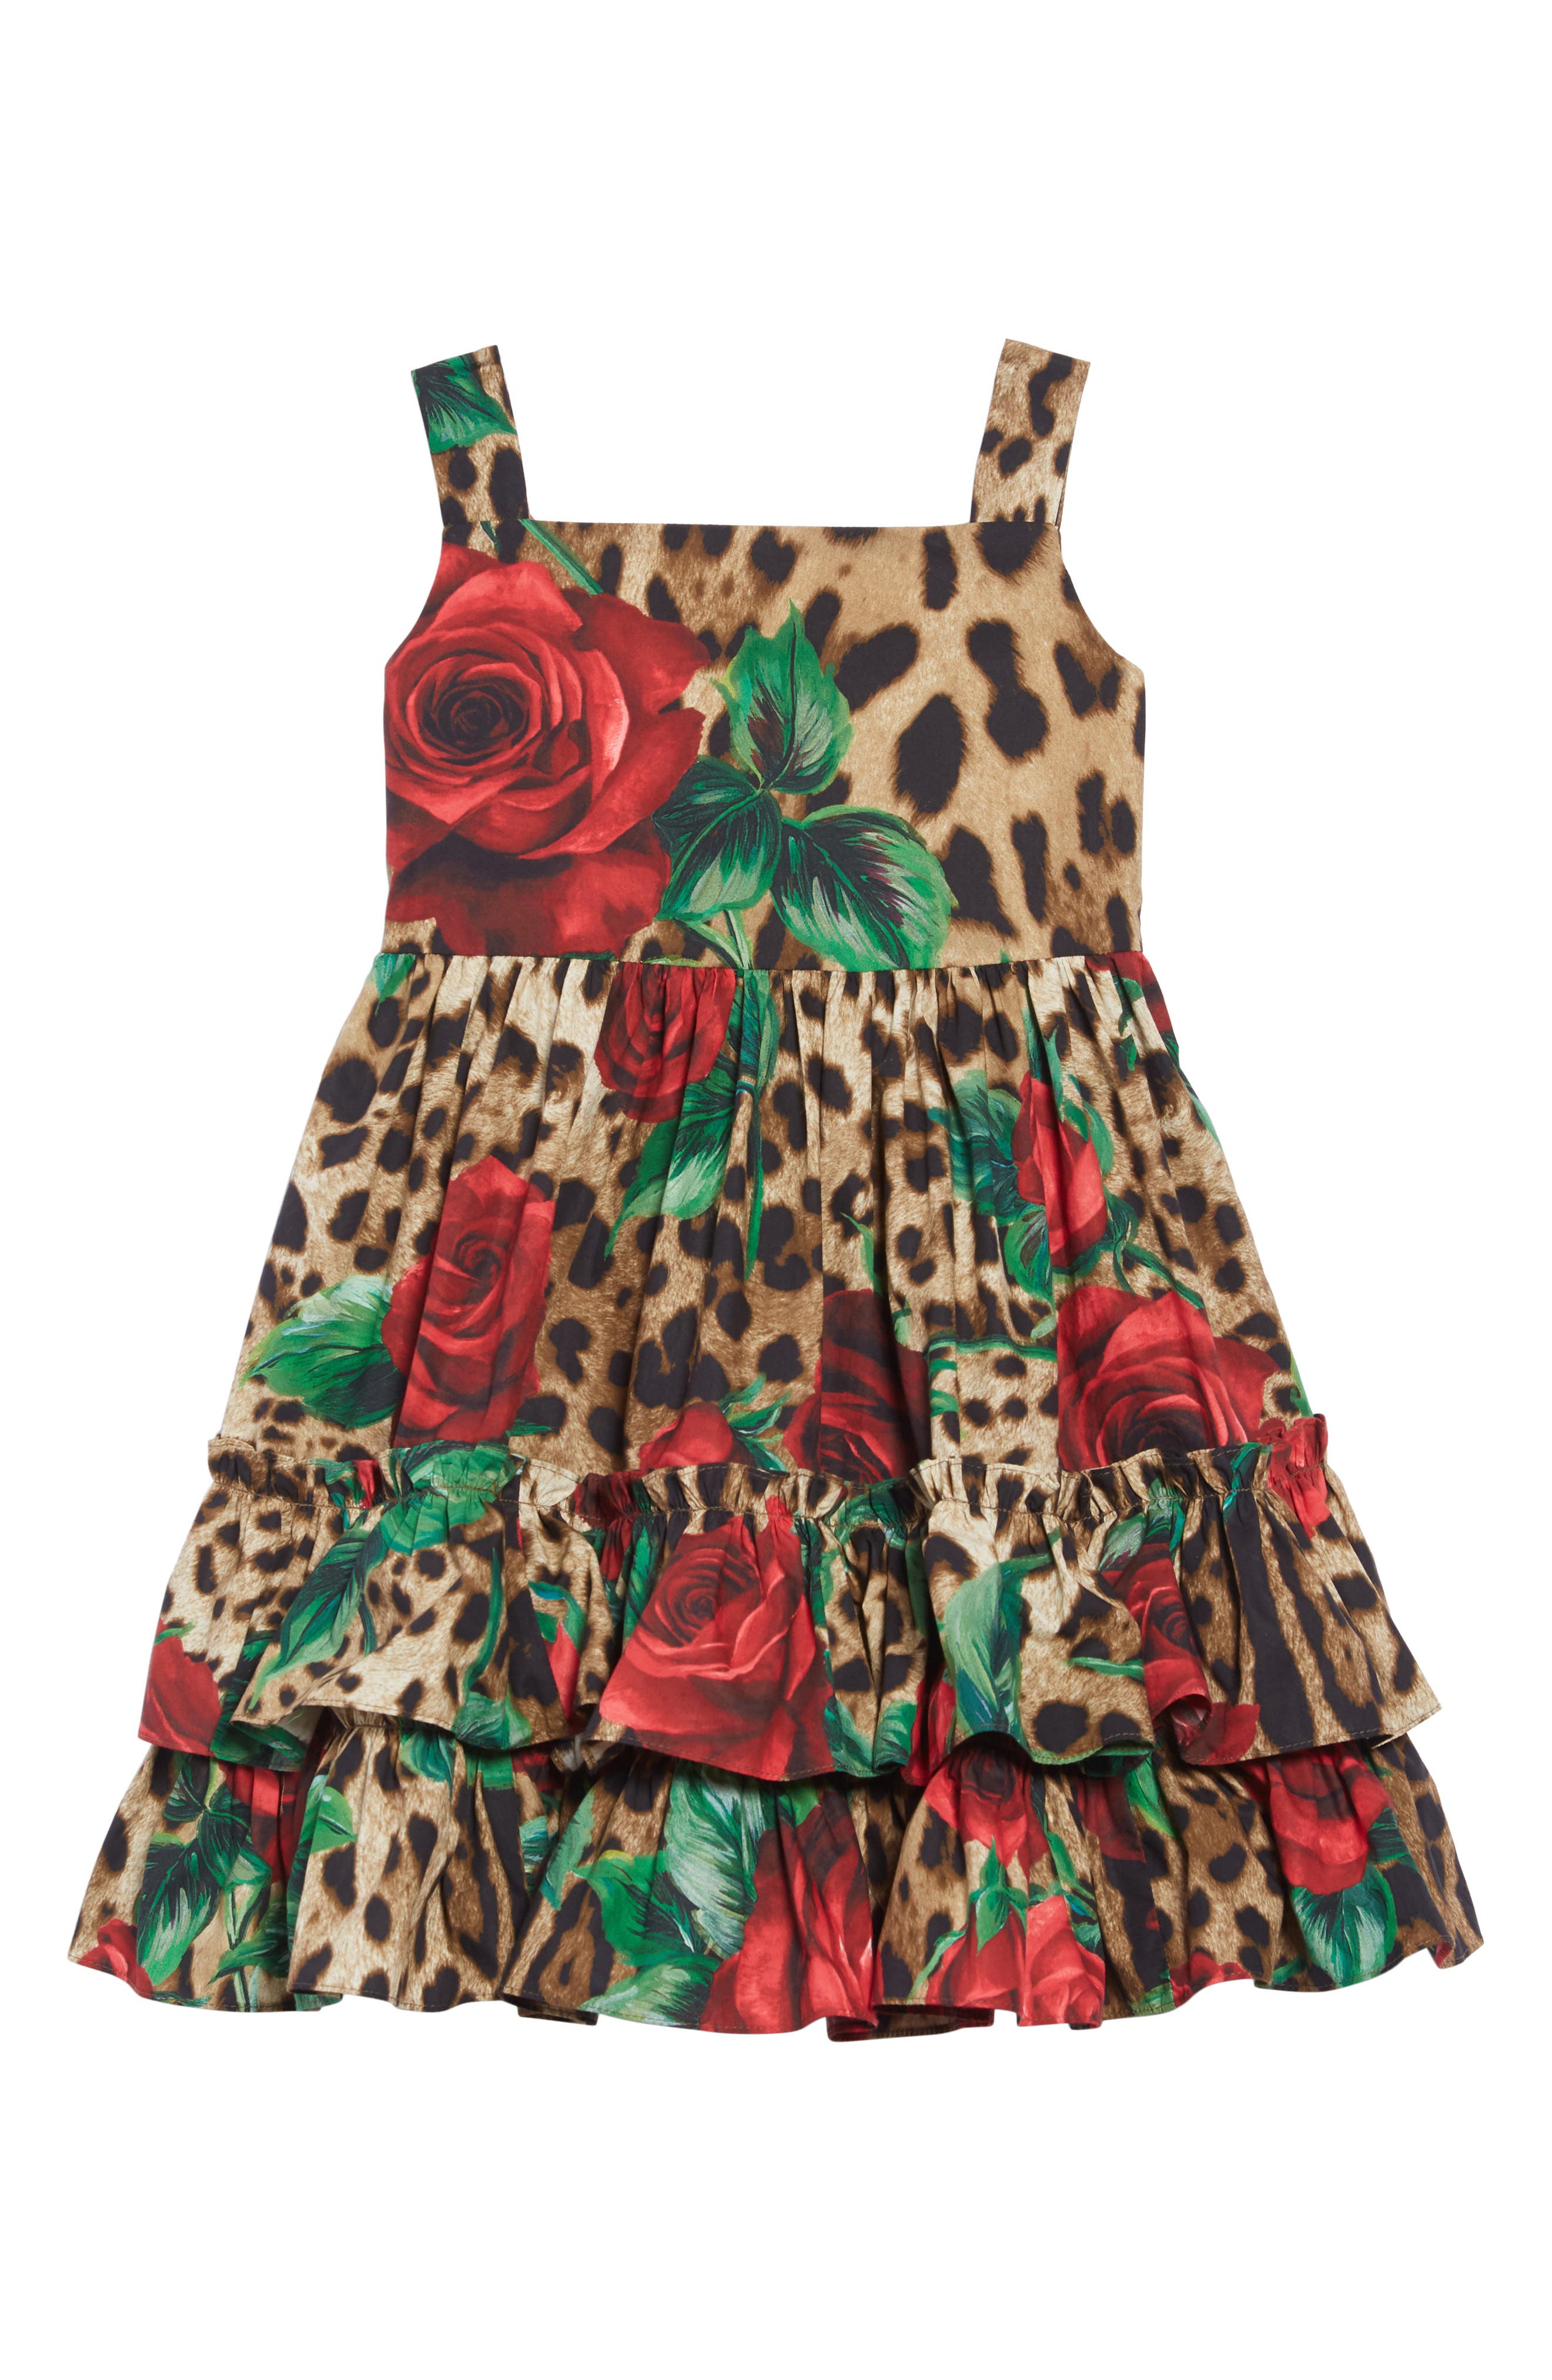 dolce and gabbana leopard and rose dress